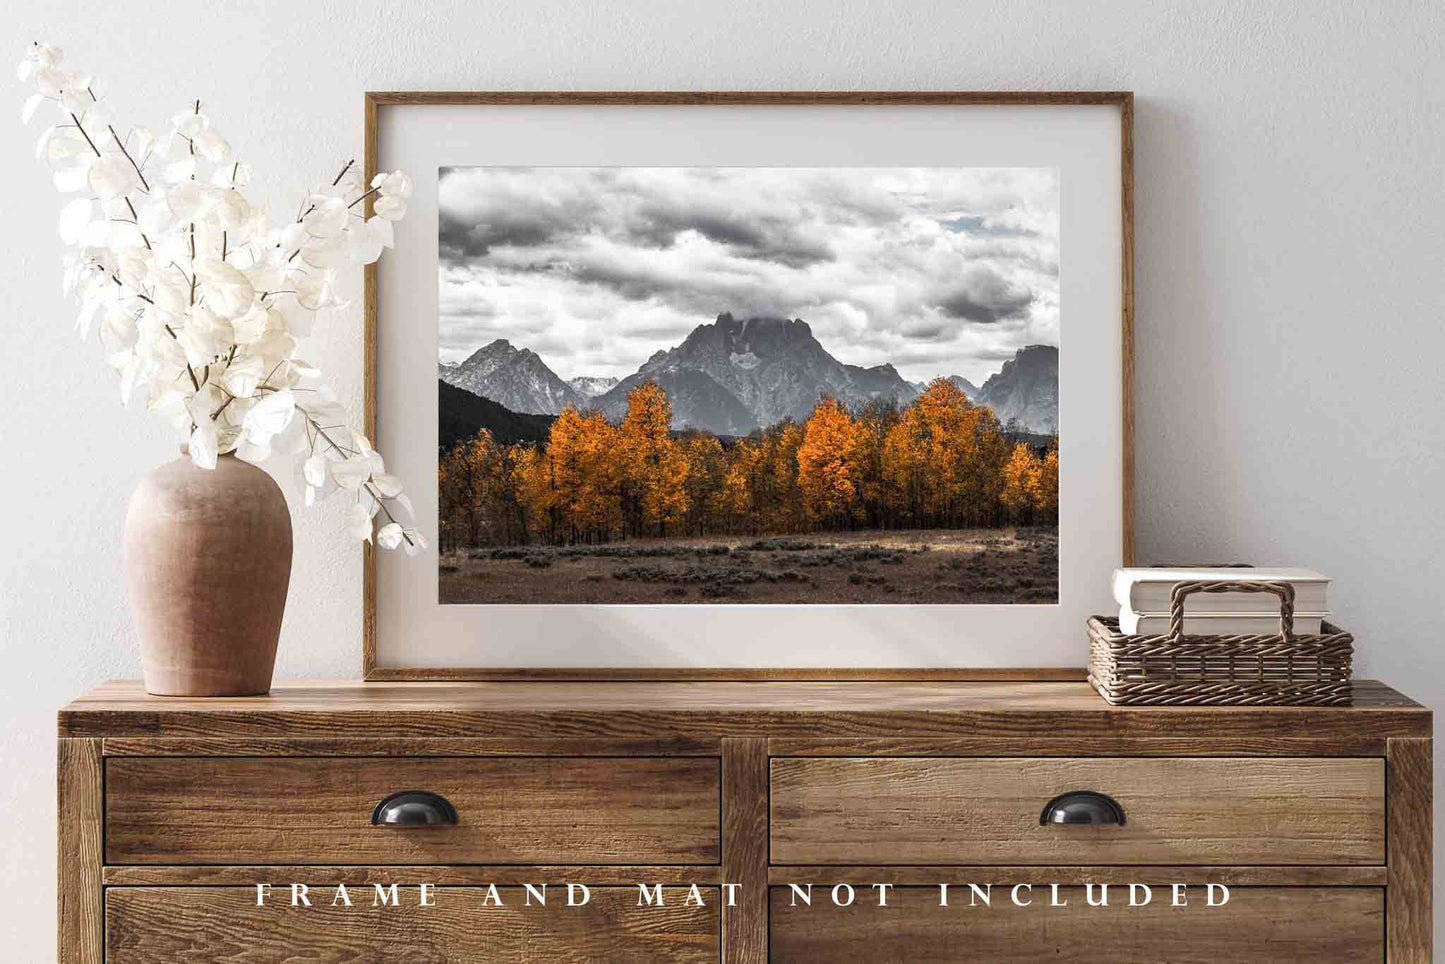 Grand Teton Photography Print - Modern Style Picture of Mt Moran in Black and White with Fall Colors in Aspen Trees in Western Wyoming